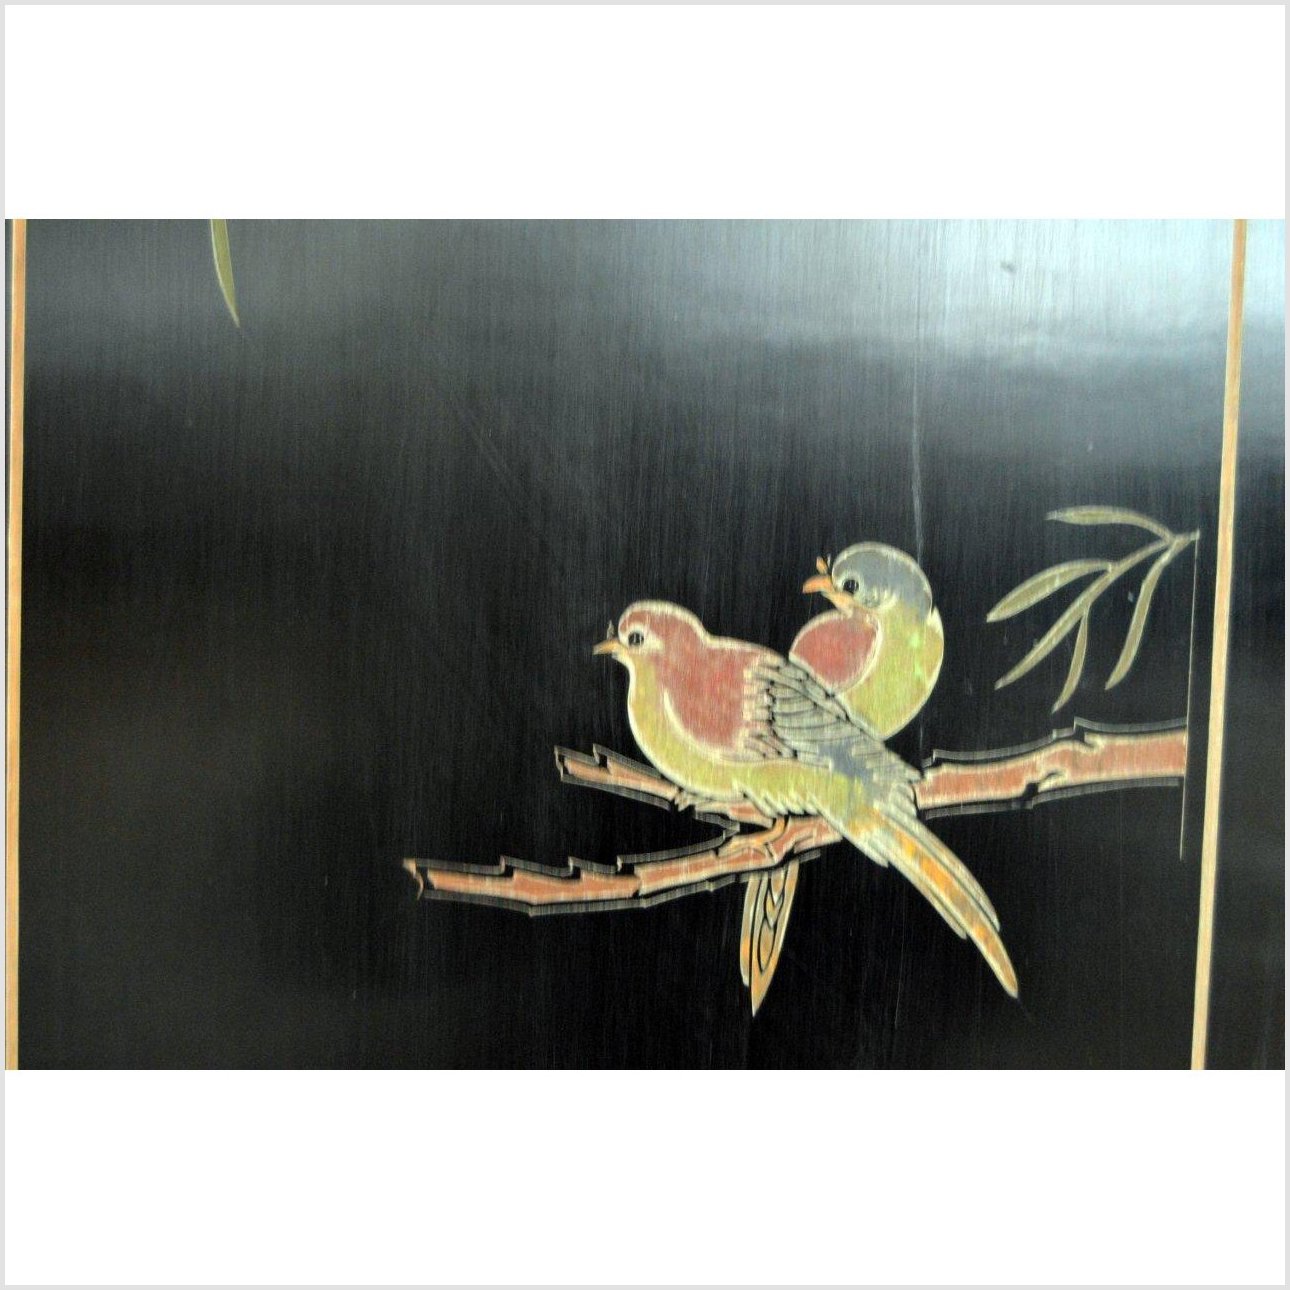 6-Panel Screen Depicting Cranes in Gold, Jade and Black Tones-YN2789-17. Asian & Chinese Furniture, Art, Antiques, Vintage Home Décor for sale at FEA Home